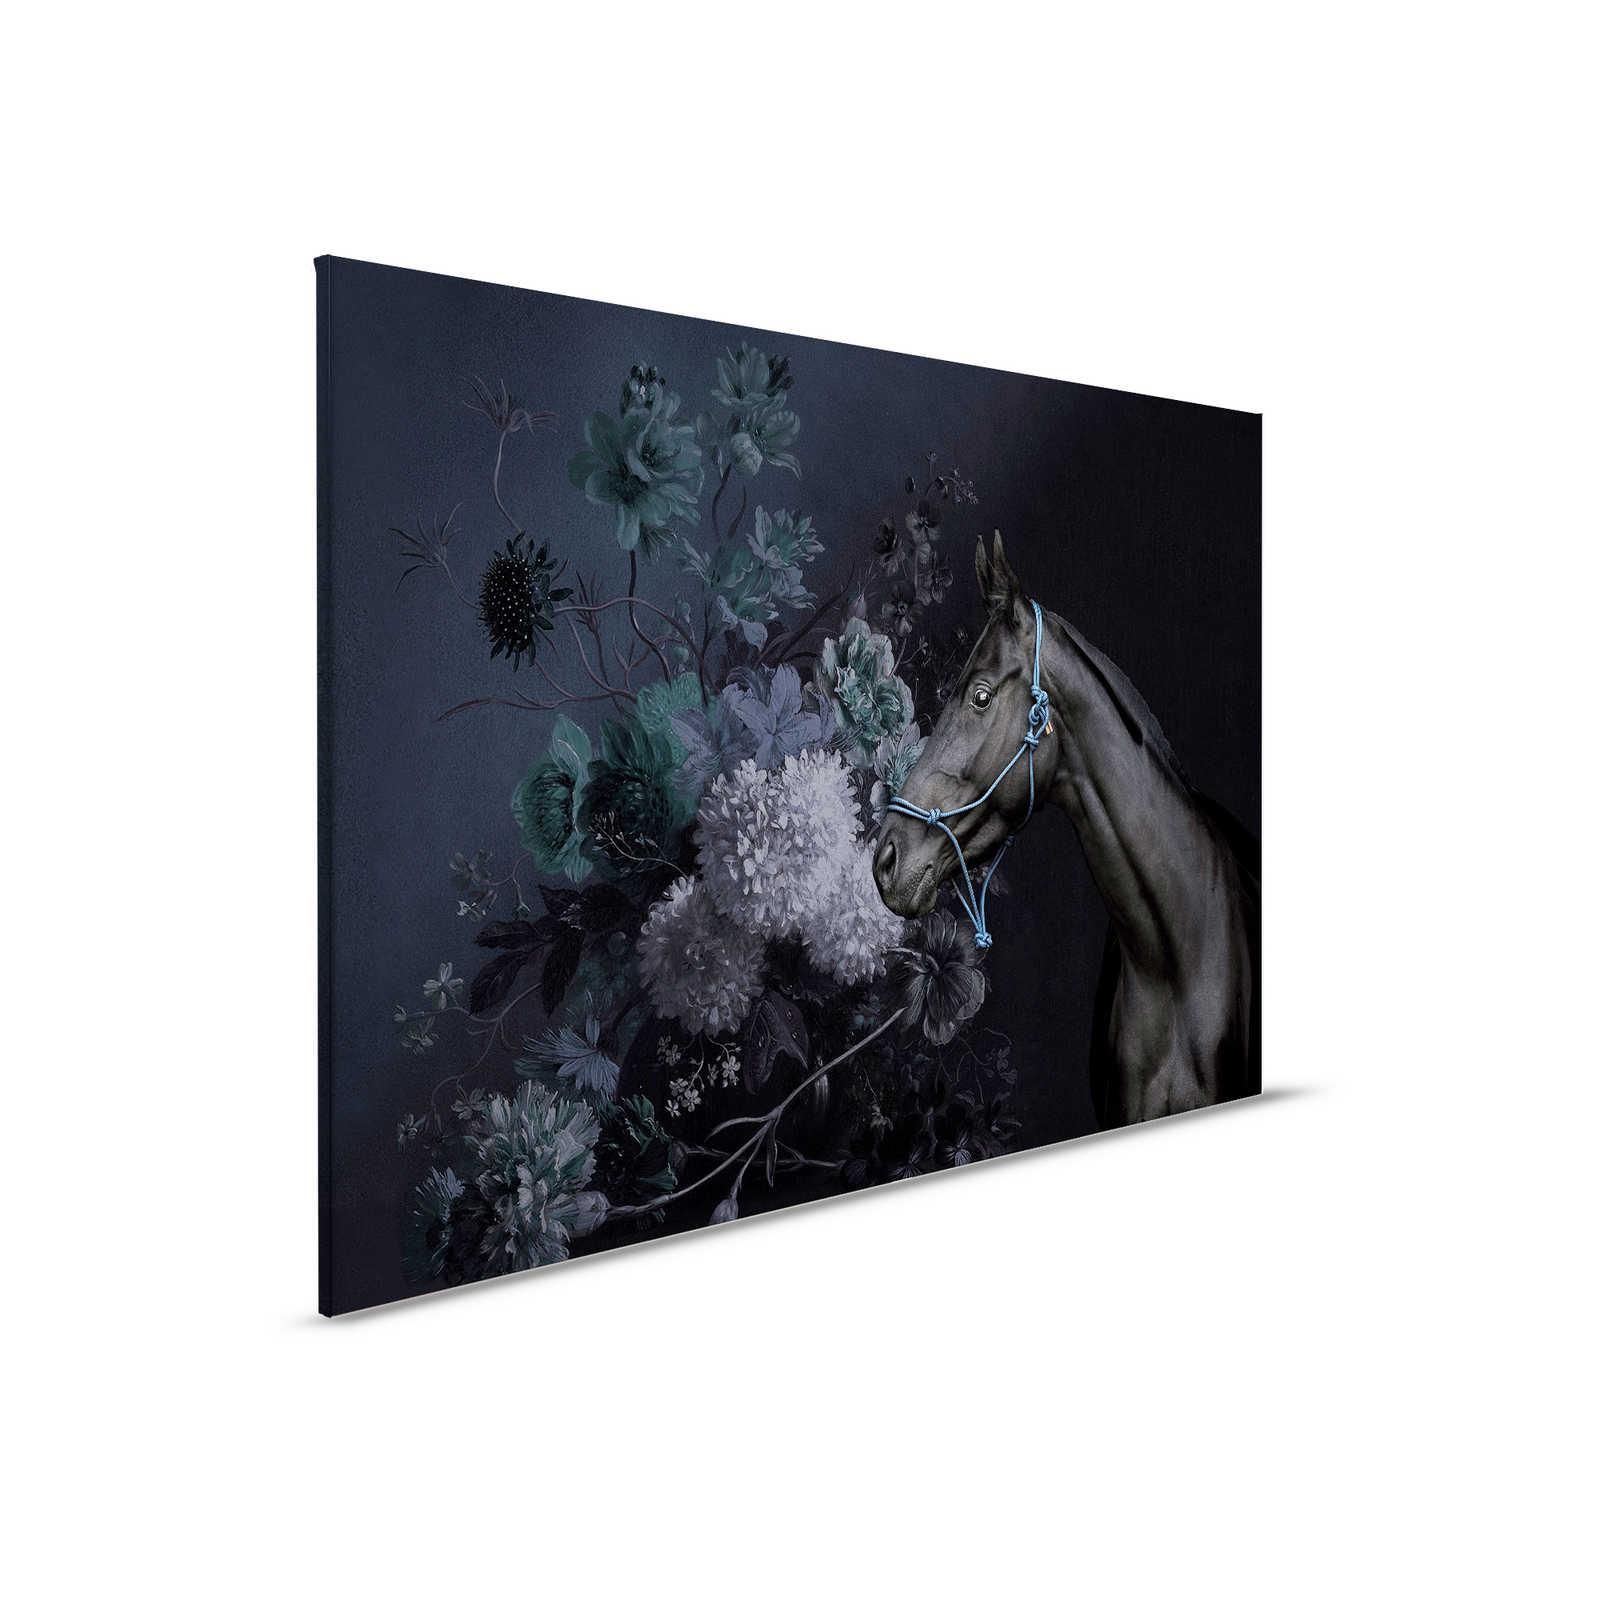         Horses Portrait Style Canvas Painting with Flowers - 0.90 m x 0.60 m
    